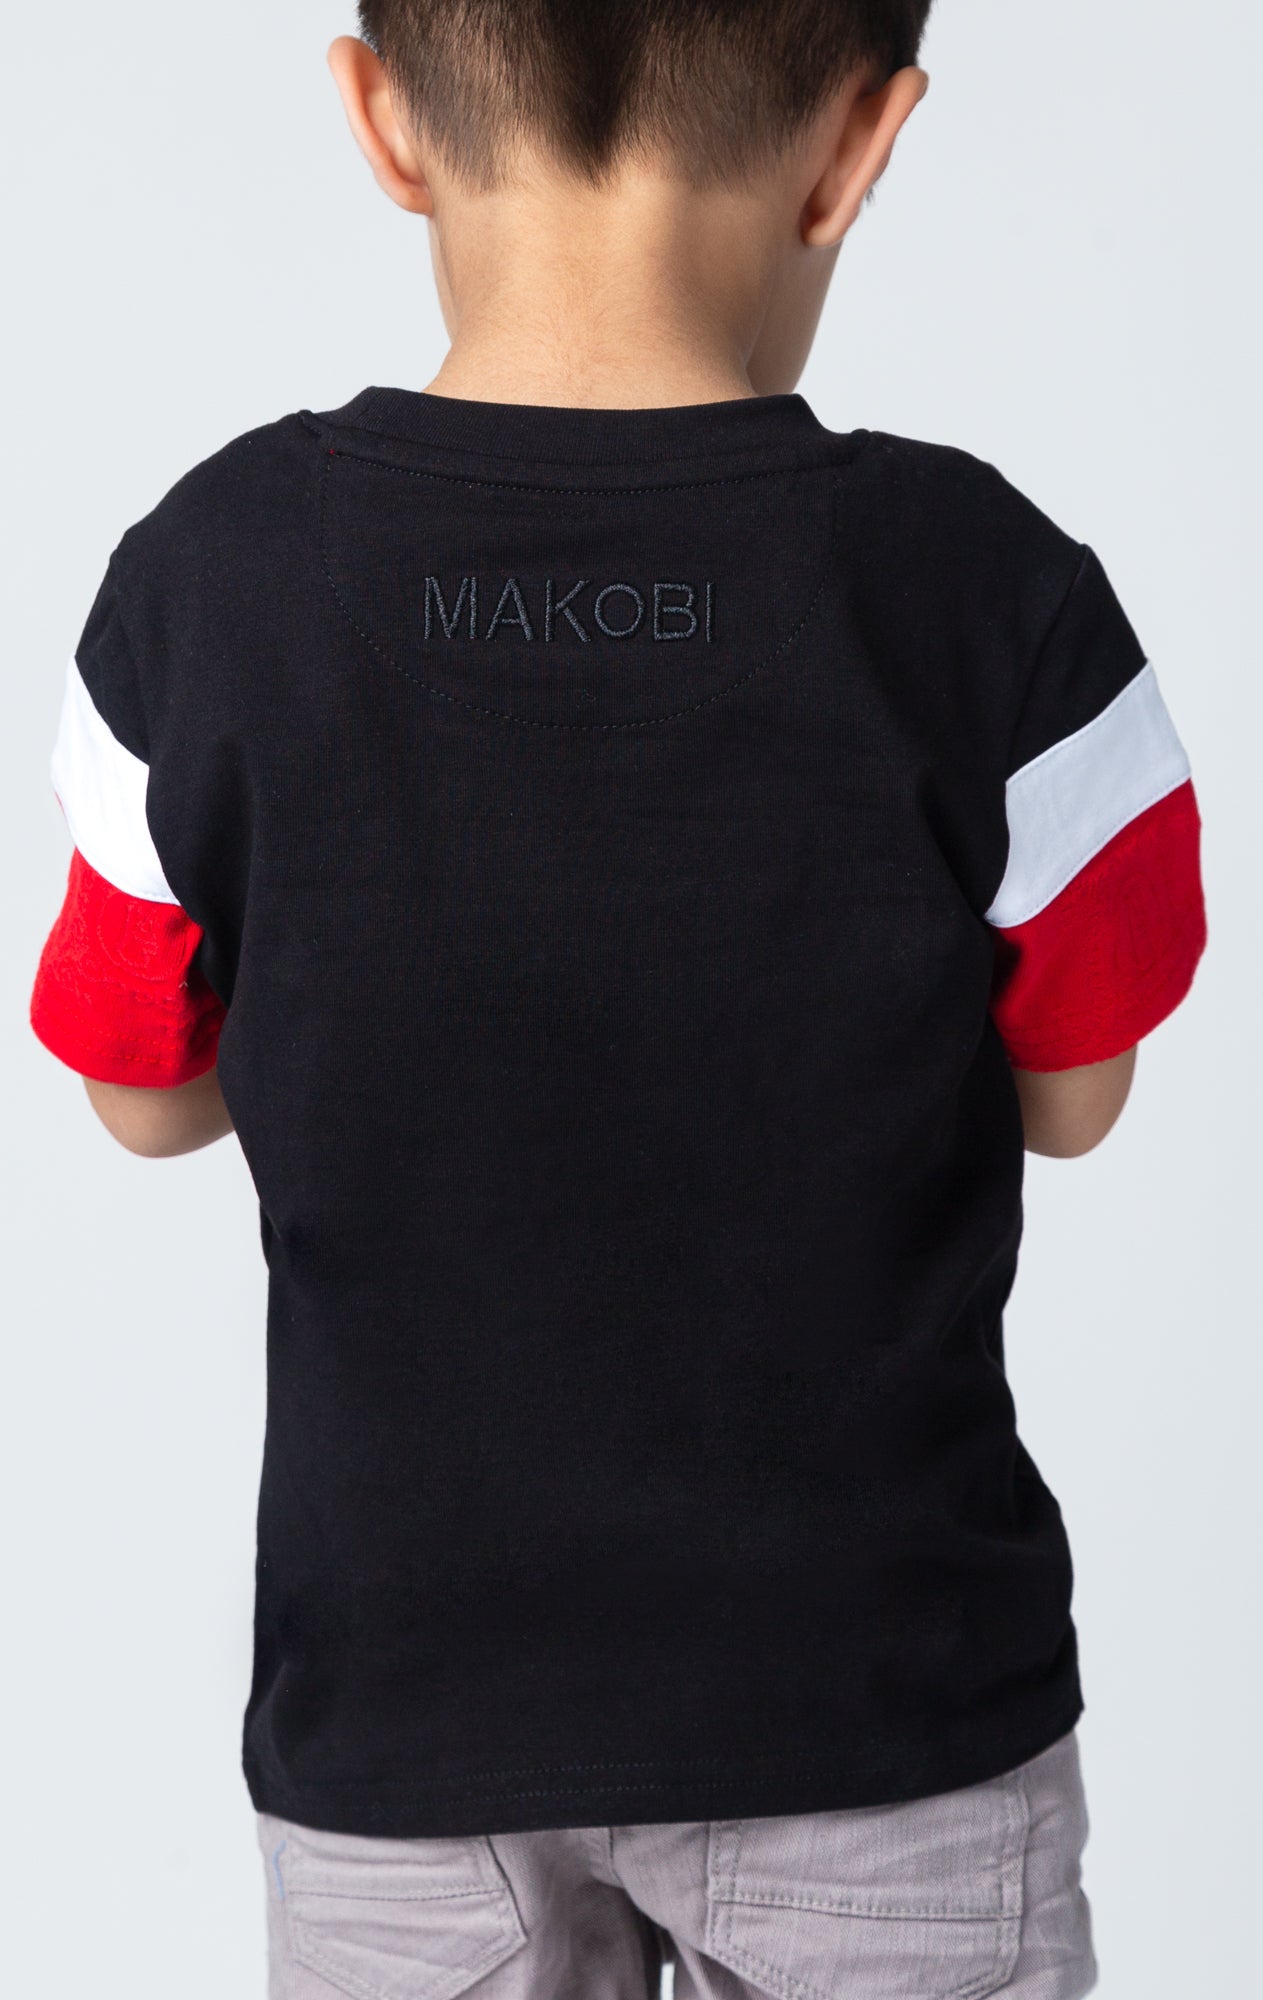 Monogram kid's t-shirt made from soft fabric back